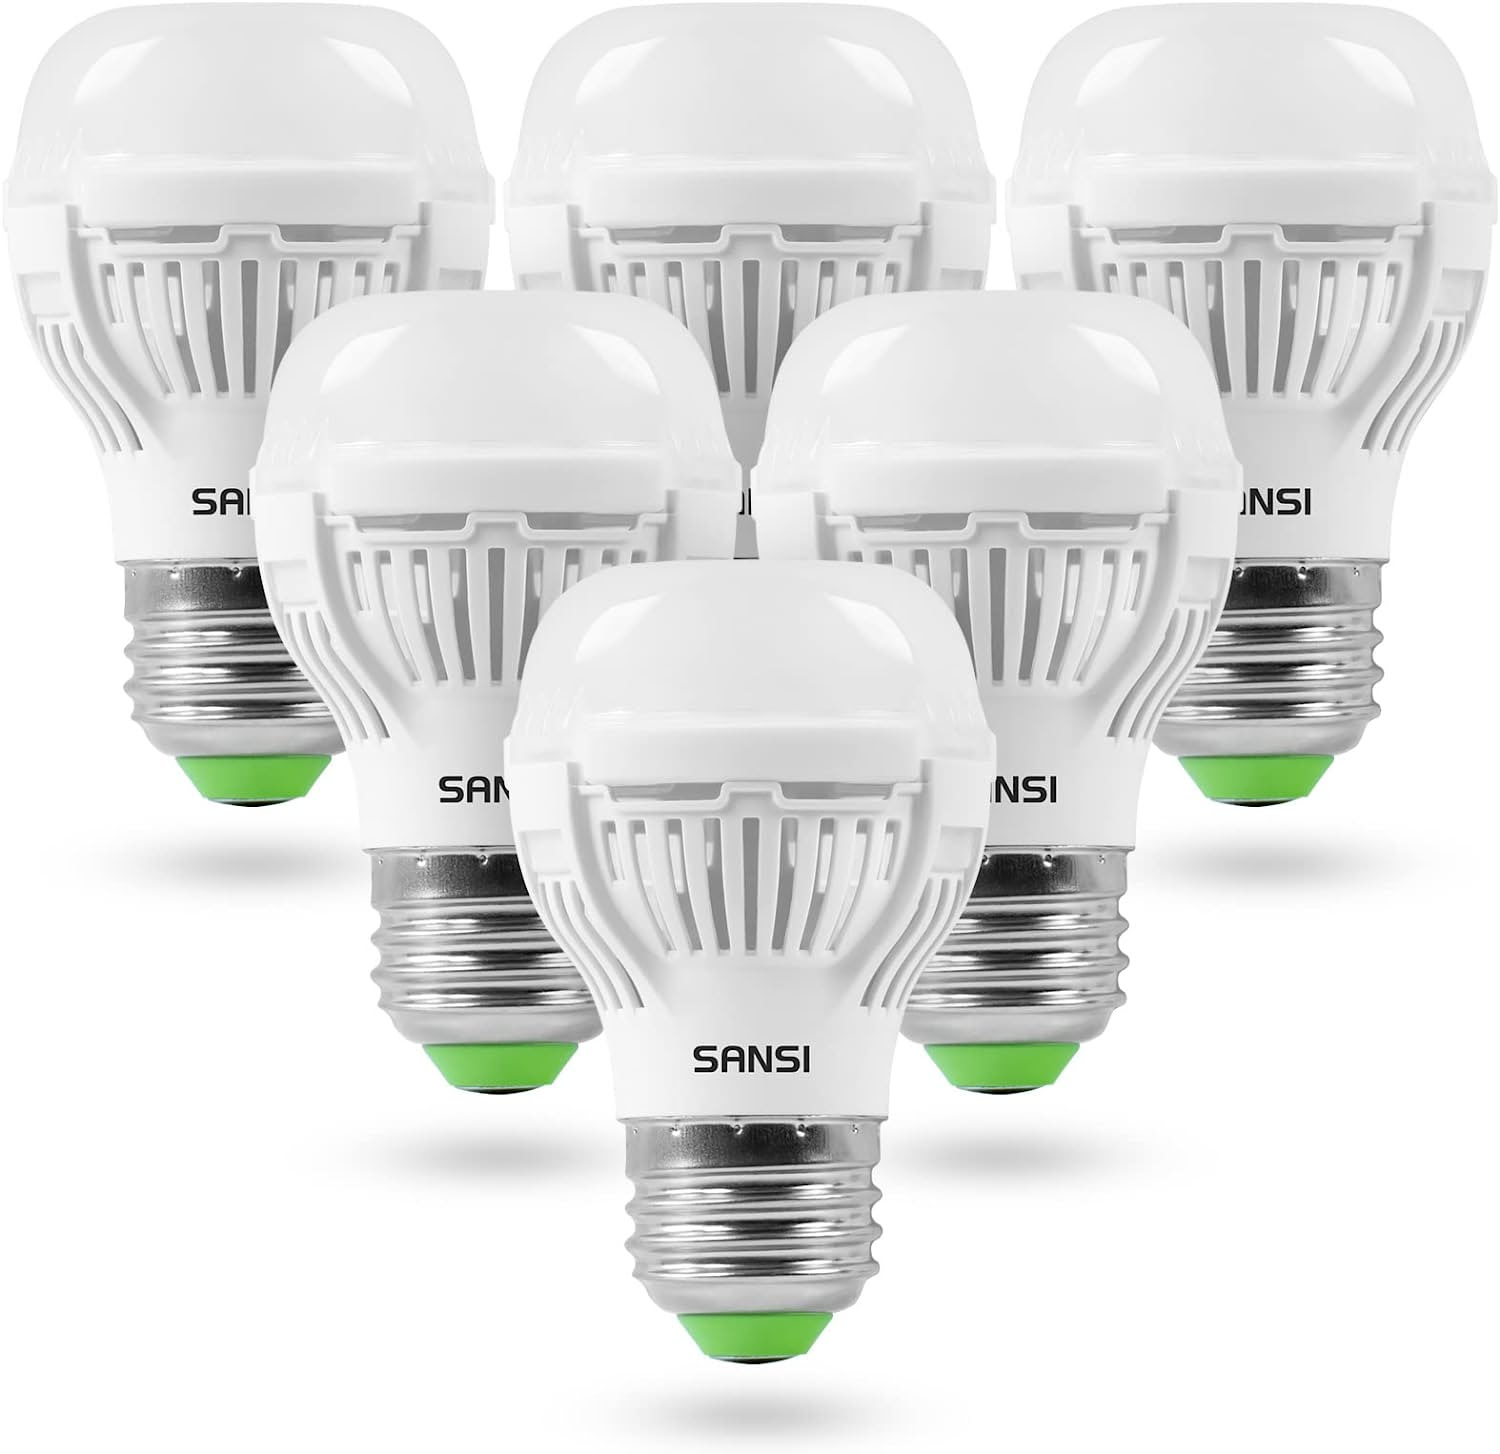 Image of Energy Saving 60W Equivalent LED Light Bulbs, 22-Year Lifetime, 900 Lumens Soft White 9W Non-Dimmable Home Lighting